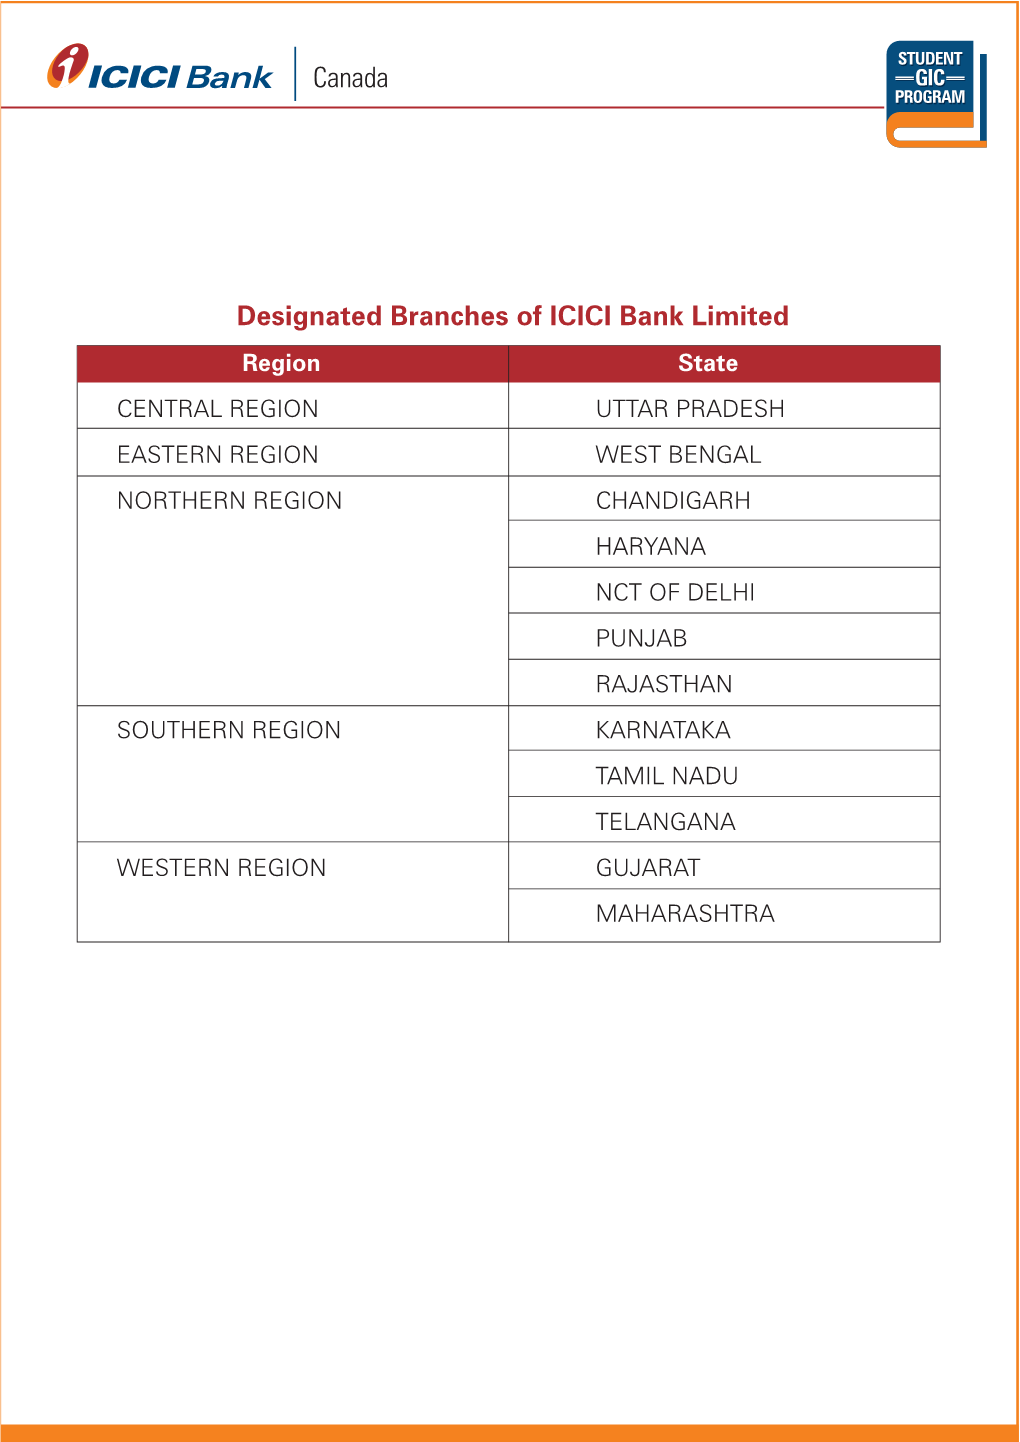 Canada Designated Branches of ICICI Bank Limited